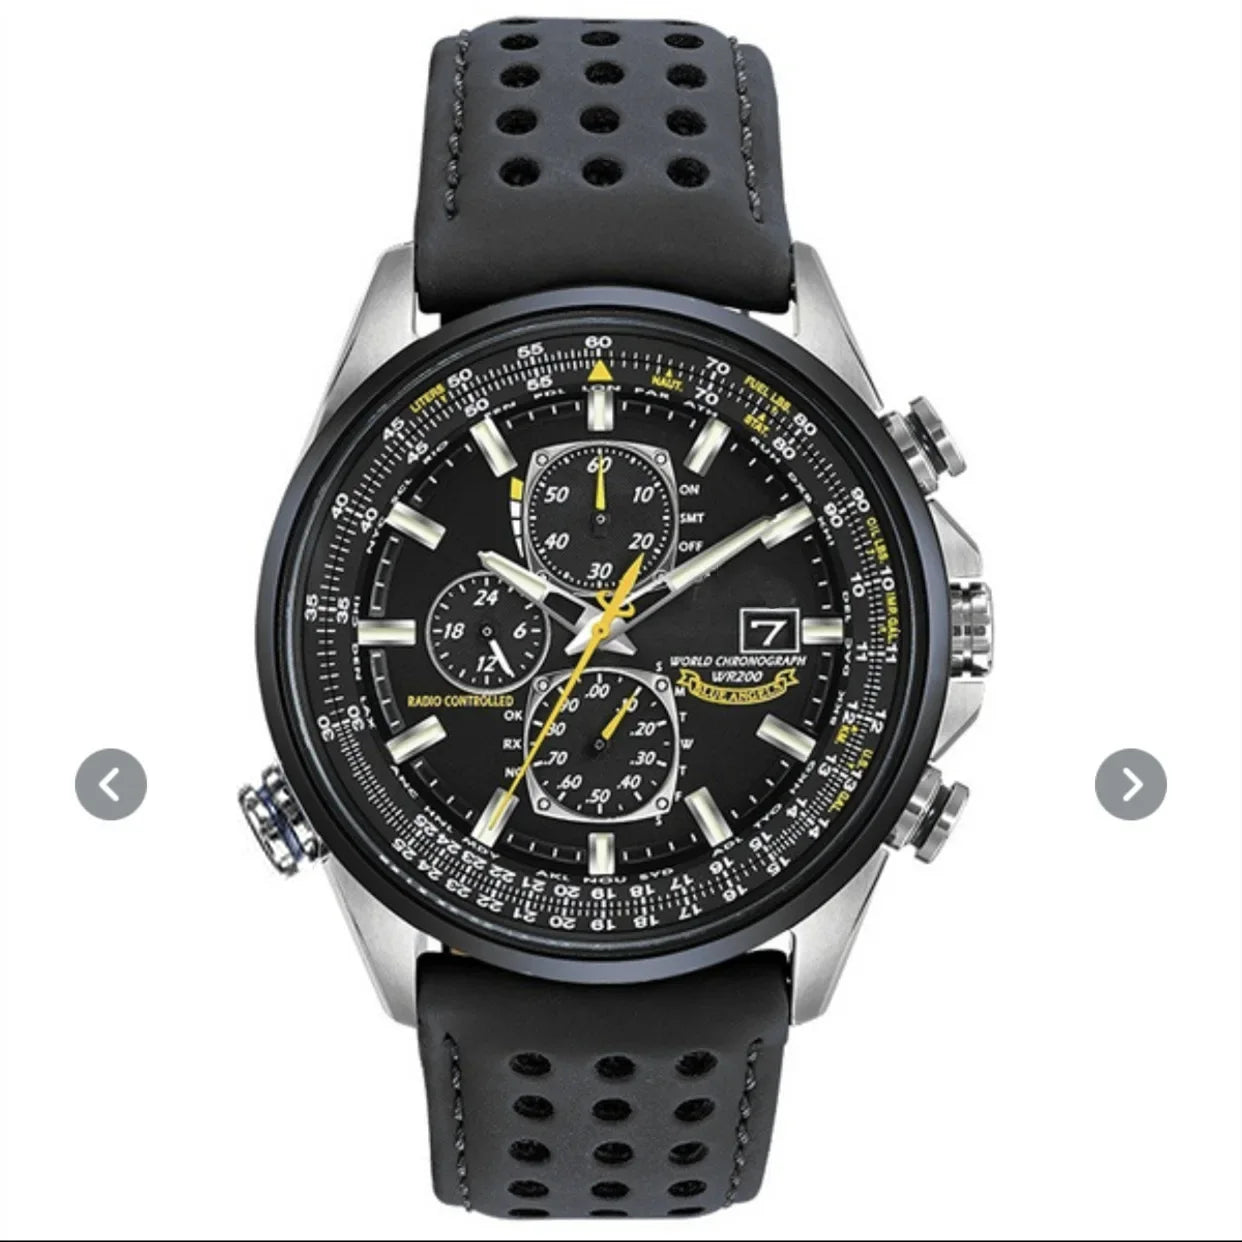  Stylish and reliable Citizen watches for men, perfect for any occasion | THE LUXURY TIME®